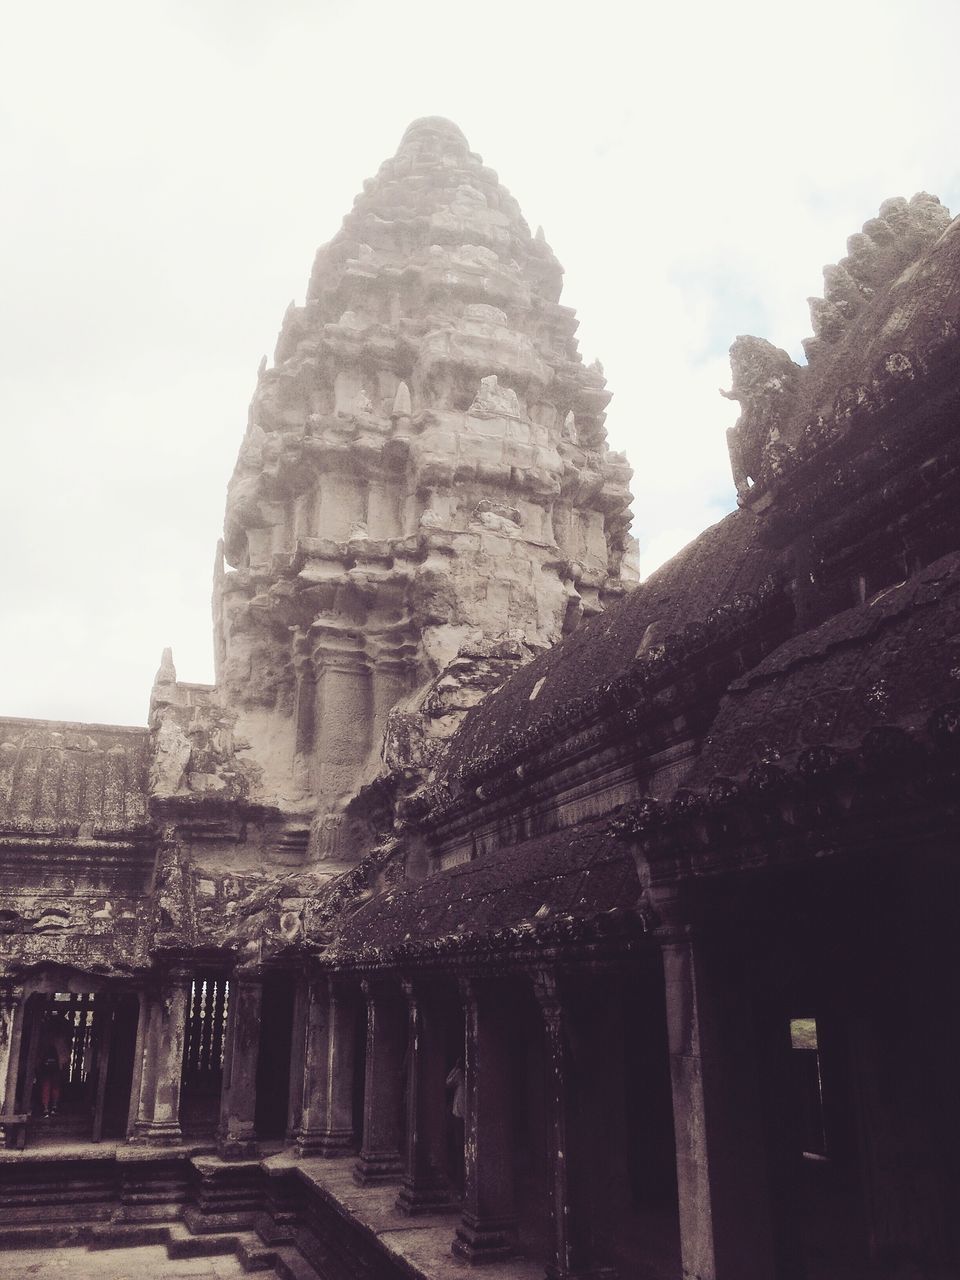 history, architecture, famous place, ancient, built structure, ancient civilization, travel destinations, old ruin, tourism, building exterior, the past, international landmark, clear sky, travel, religion, place of worship, unesco world heritage site, spirituality, old, temple - building